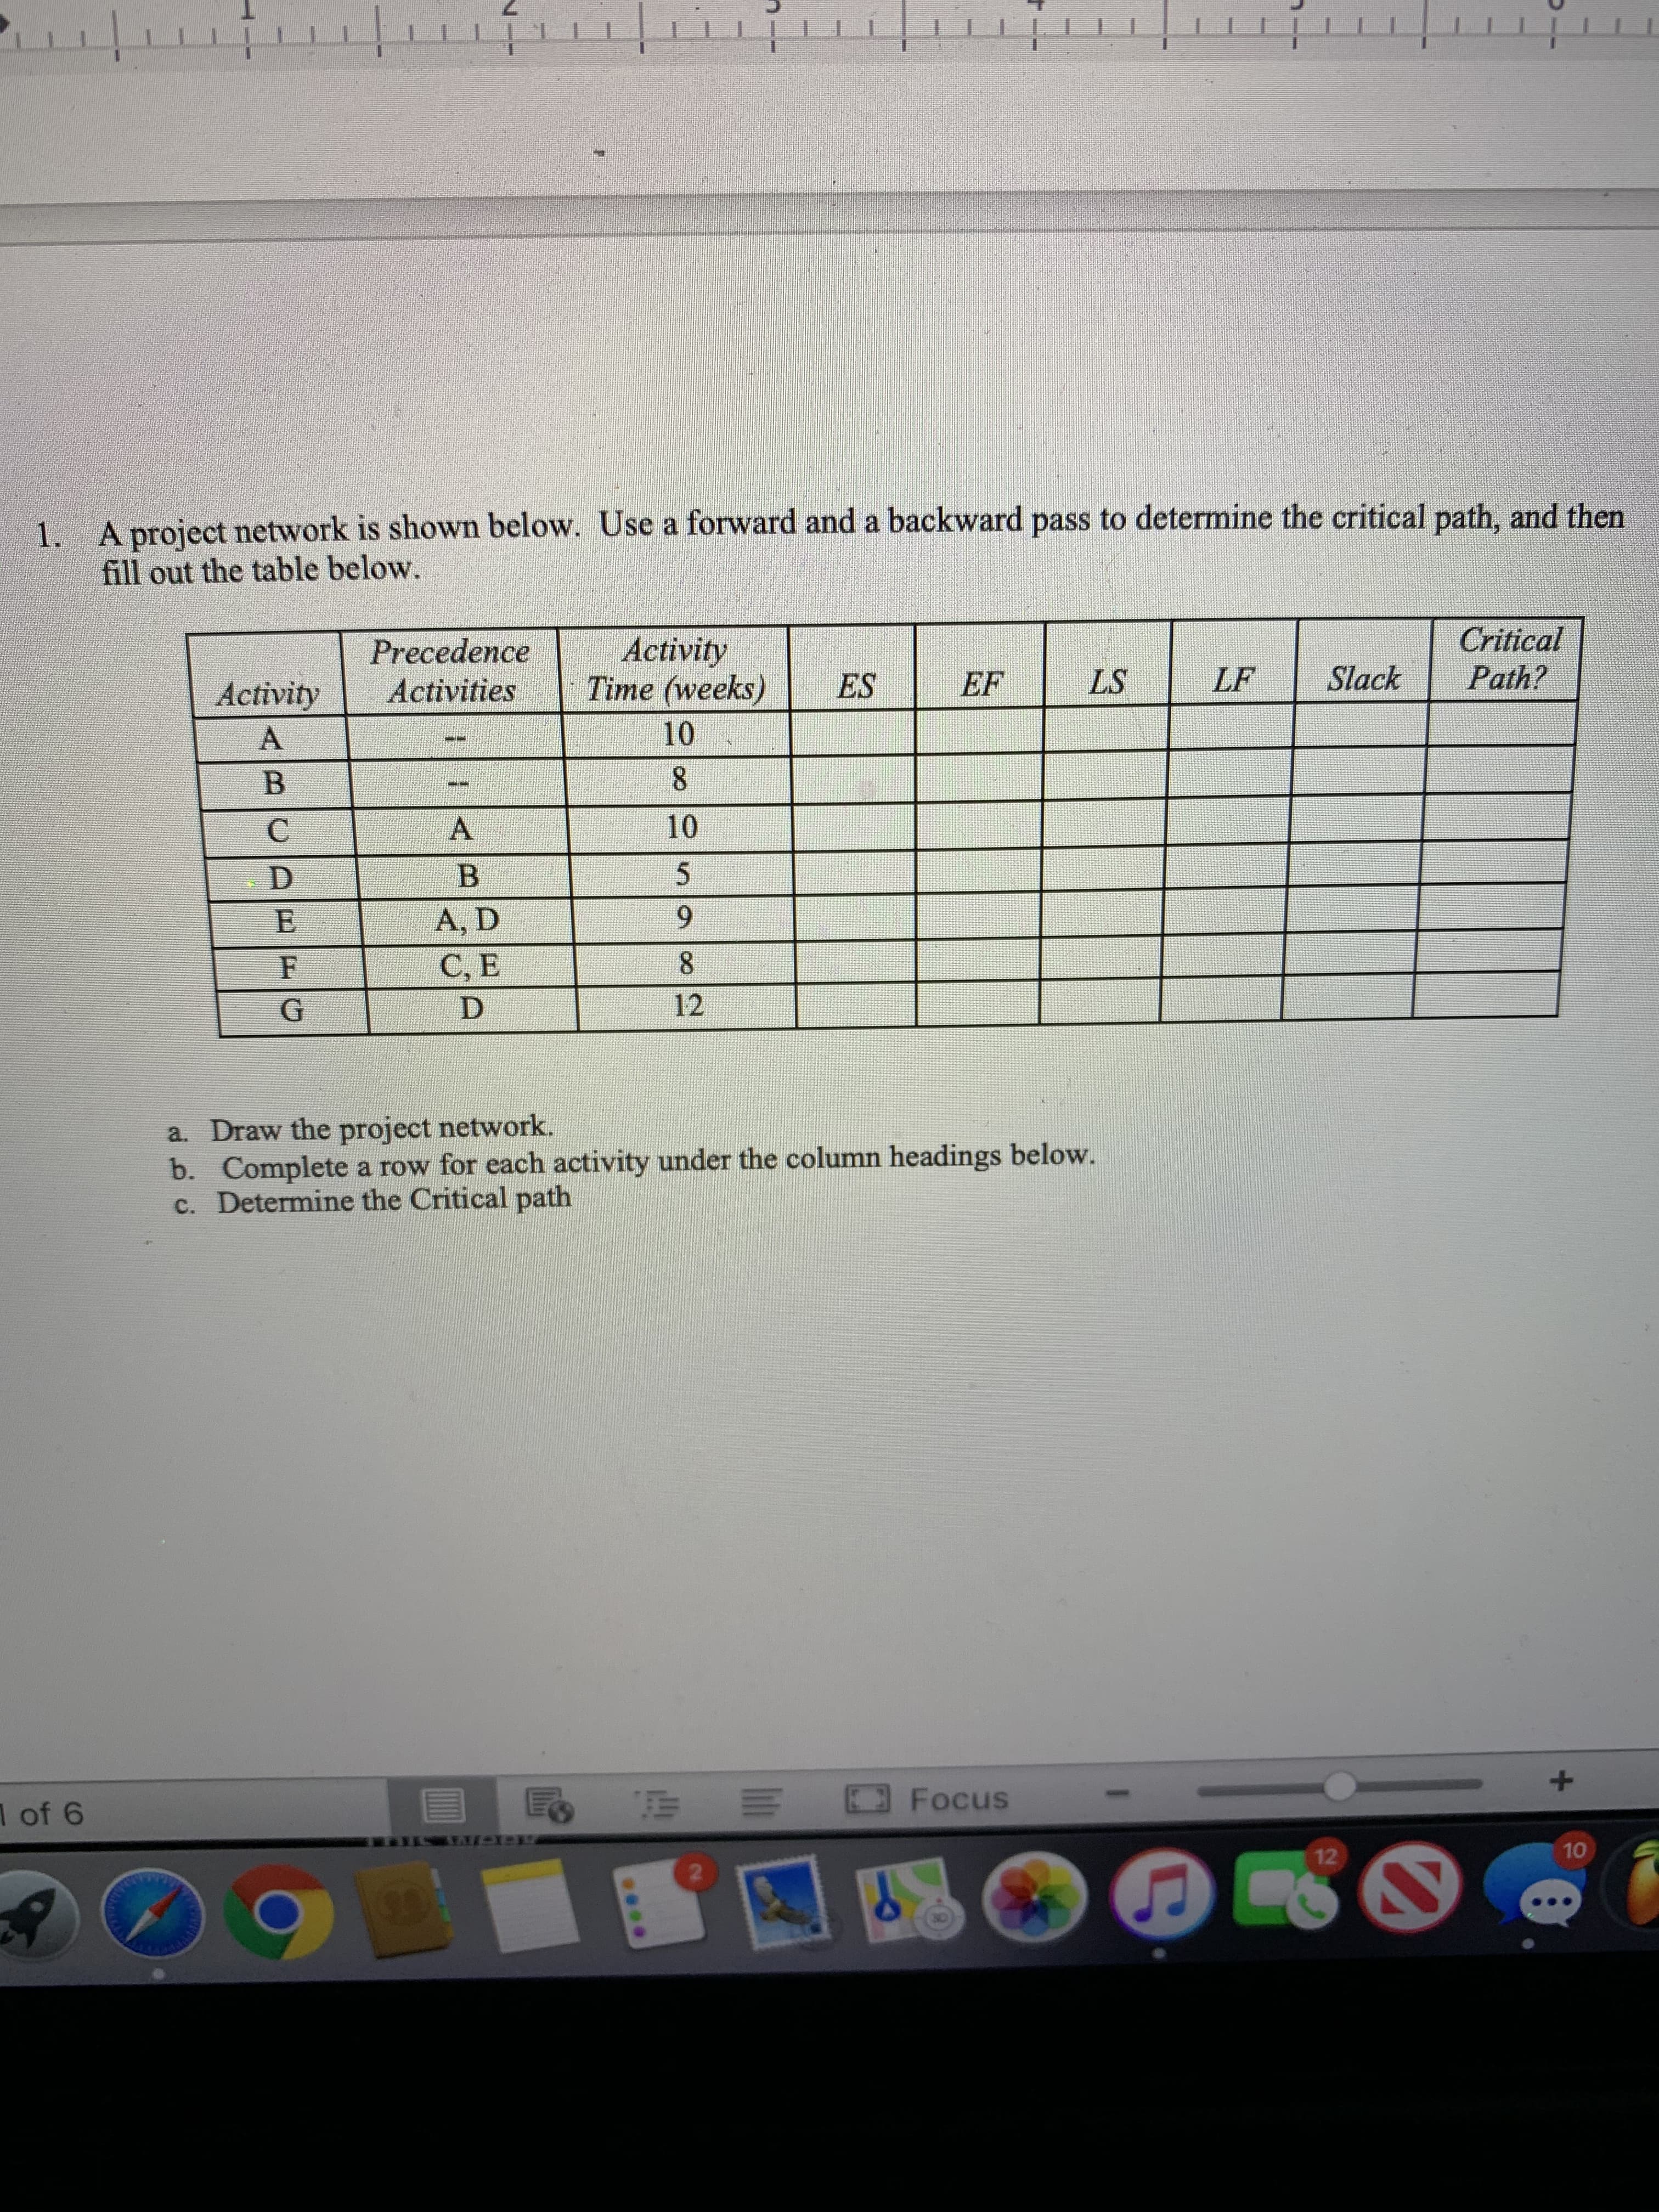 A project network is shown below. Use a forward and a backward pass to determine the critical path, and then
fill out the table below.
Precedence
Activities
Activity
Time (weeks)
10
Critical
Path?
Activity
ES
EF
LS
LF
Slack
B.
10
D.
B
A, D
C, E
8.
12
a. Draw the project network.
b. Complete a row for each activity under the column headings below.
c. Determine the Critical path
